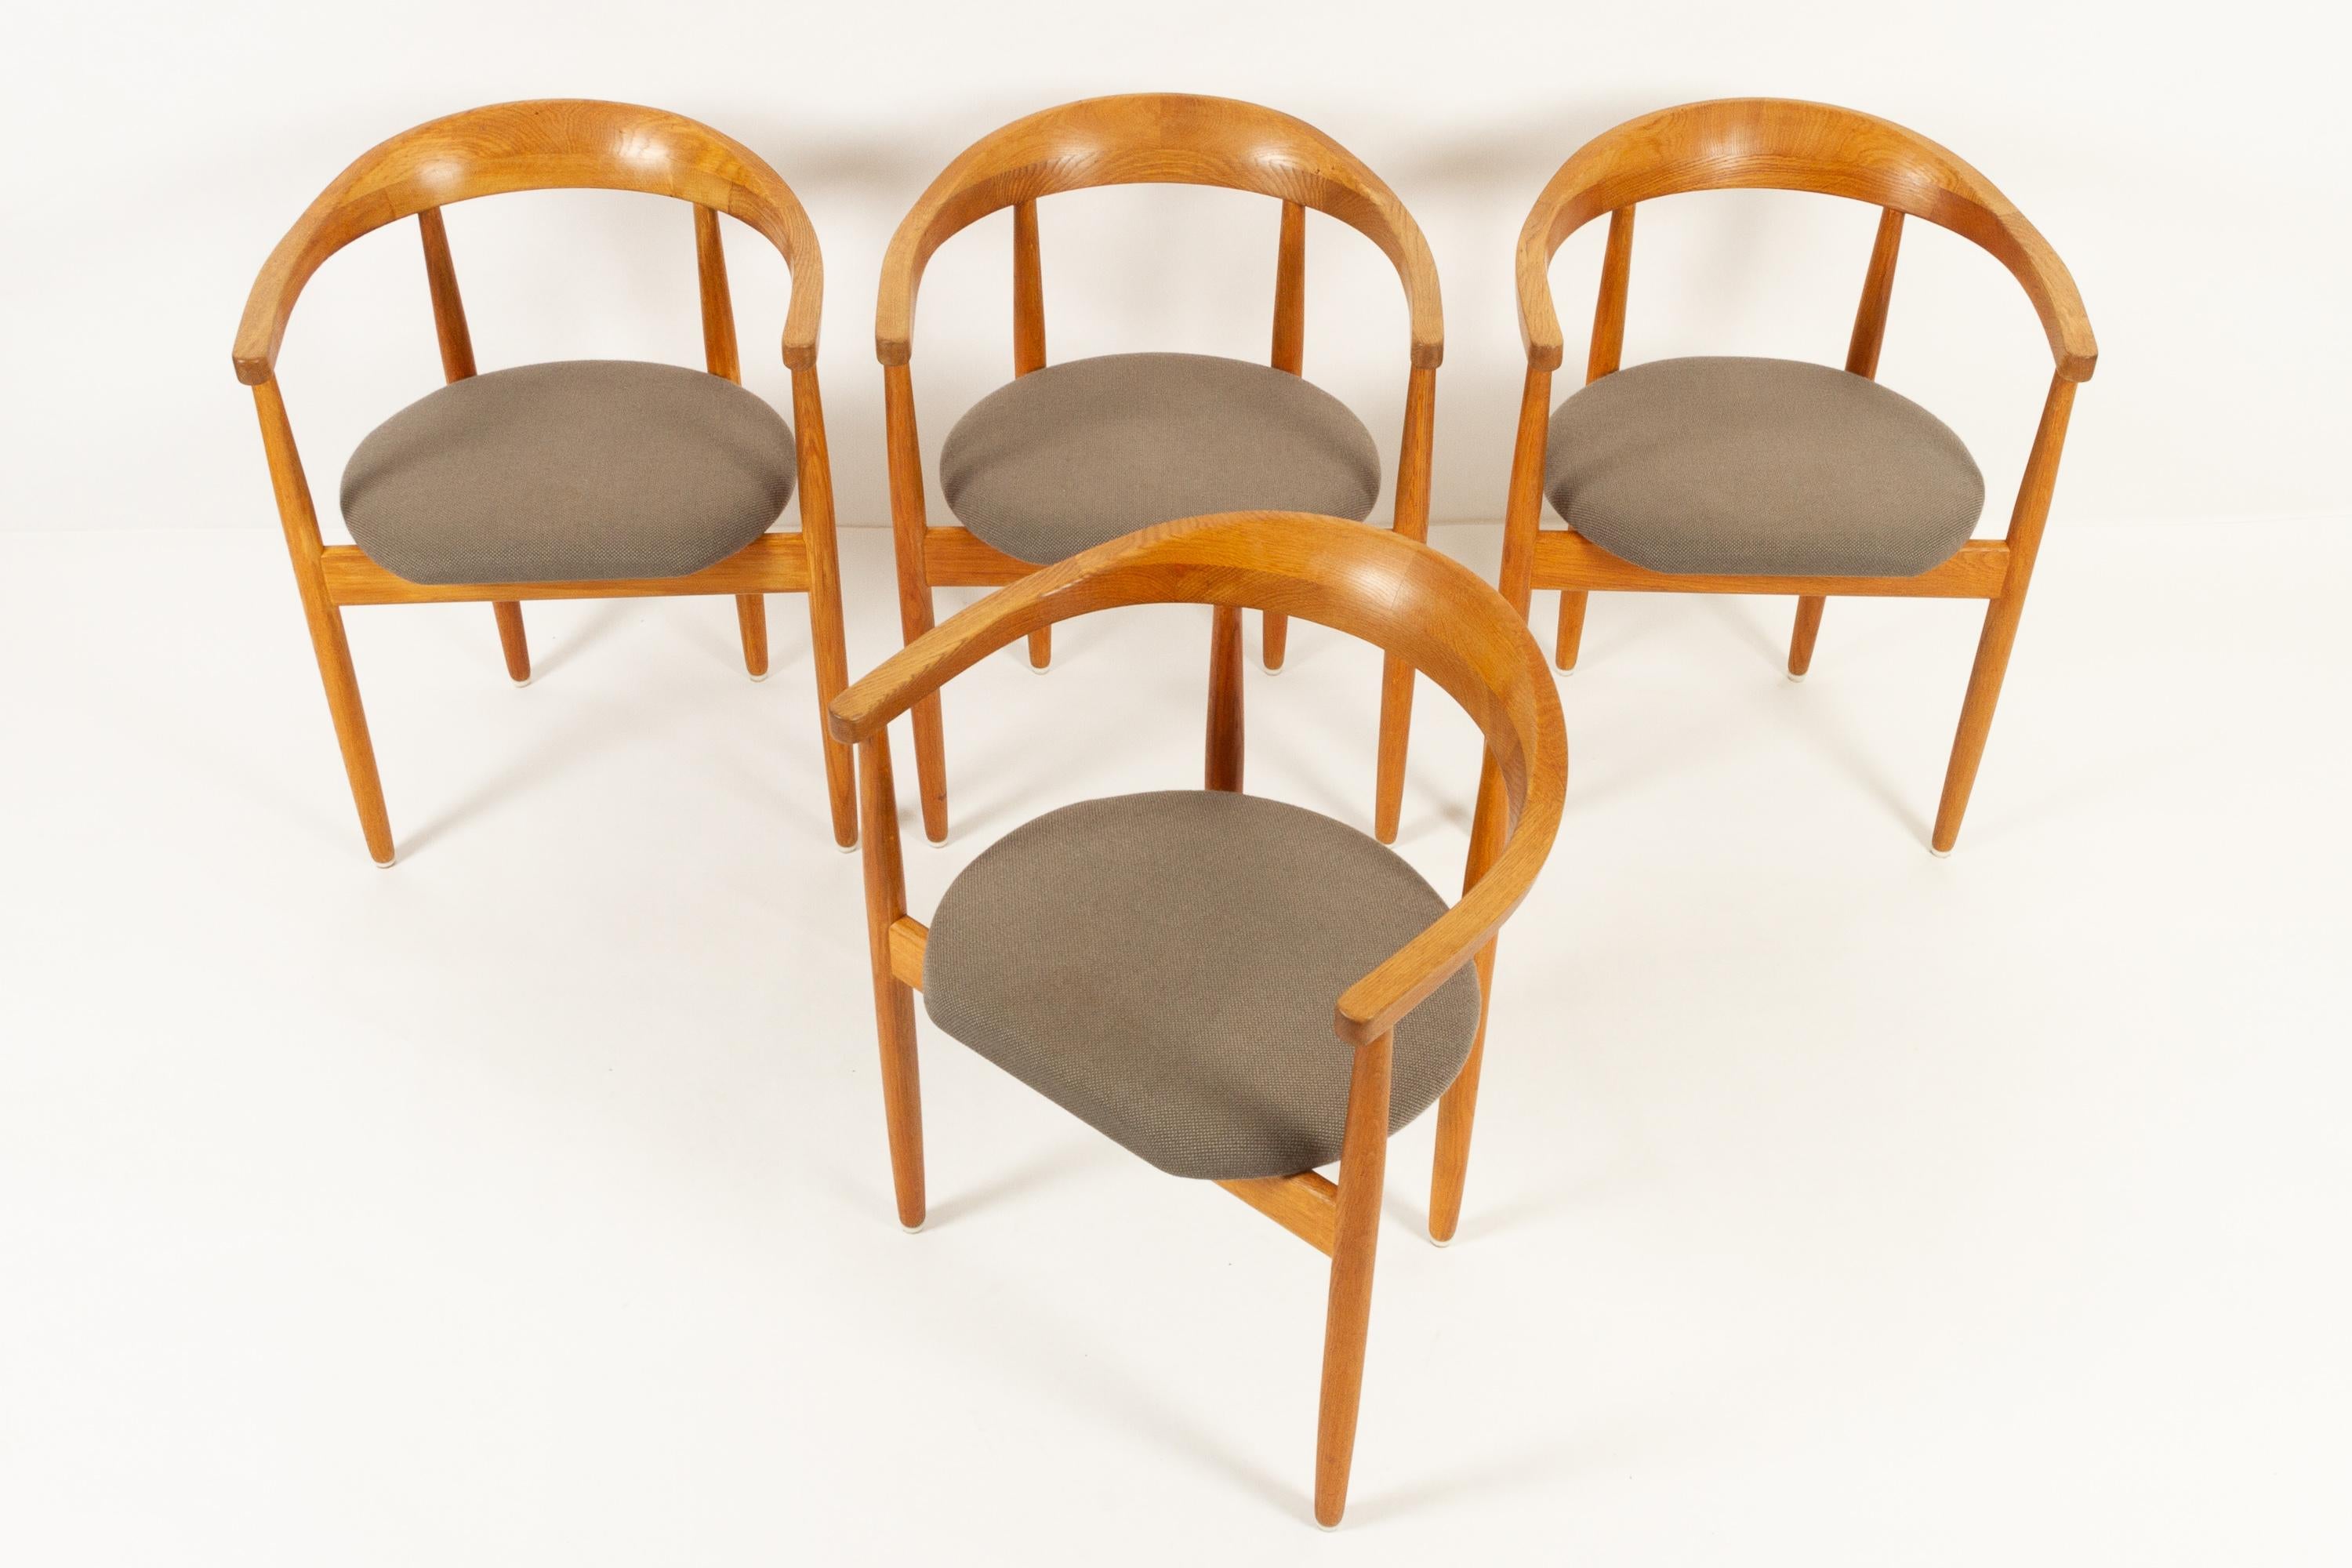 Vintage Danish oak armchairs by Bondo Gravesen, 1960s.
Beautiful set of four rare midcentury modern oak armchairs with large curved backrests in solid oak. Round tapered vertical legs. Amazing joinery work in very high quality by Danish